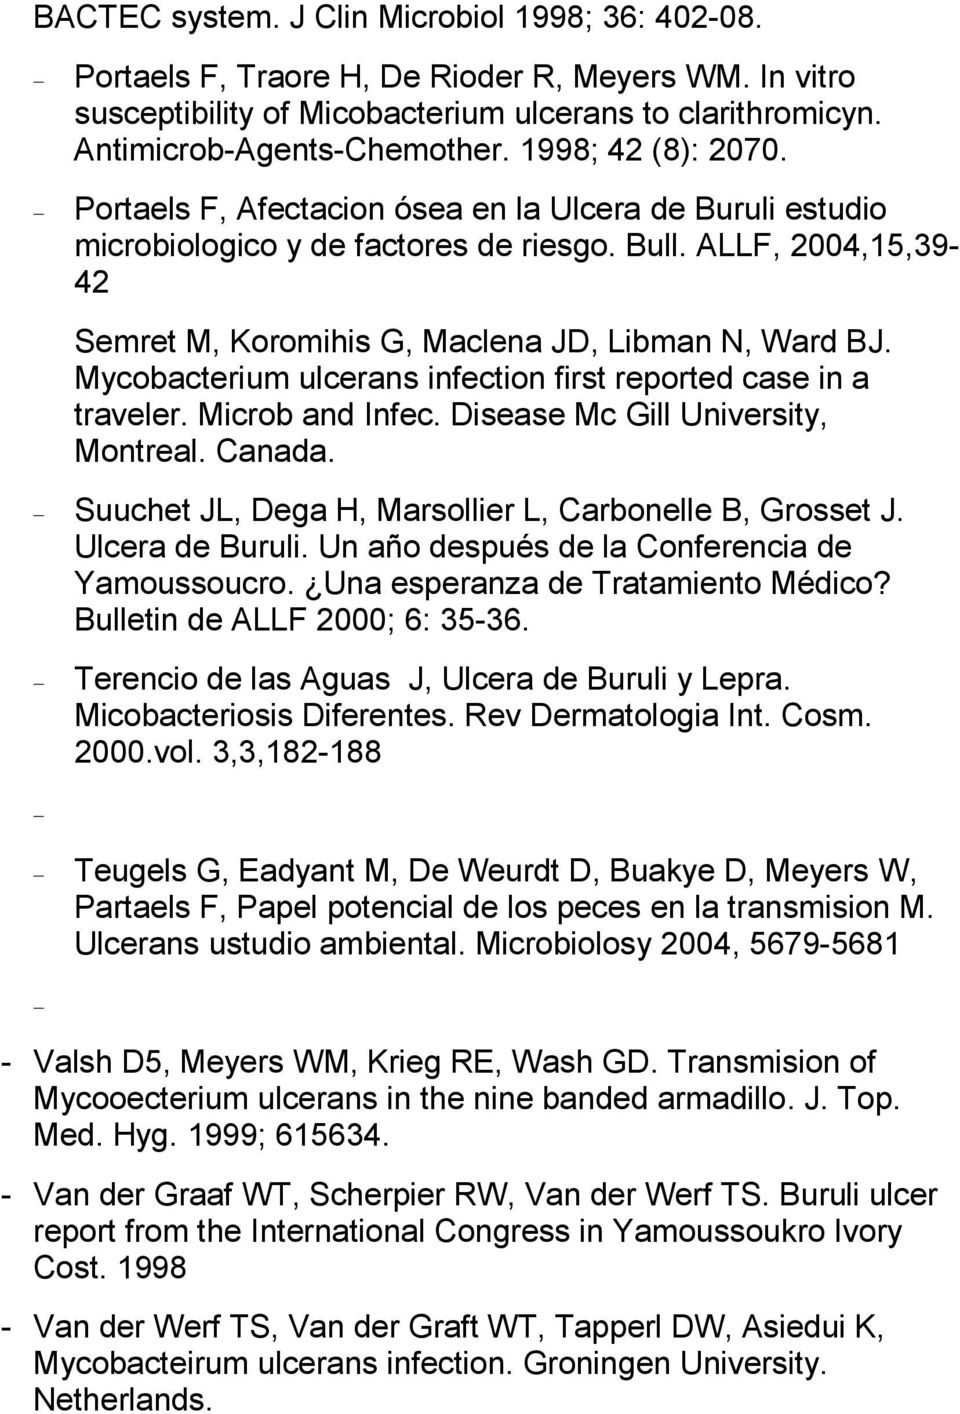 Mycobacterium ulcerans infection first reported case in a traveler. Microb and Infec. Disease Mc Gill University, Montreal. Canada. Suuchet JL, Dega H, Marsollier L, Carbonelle B, Grosset J.